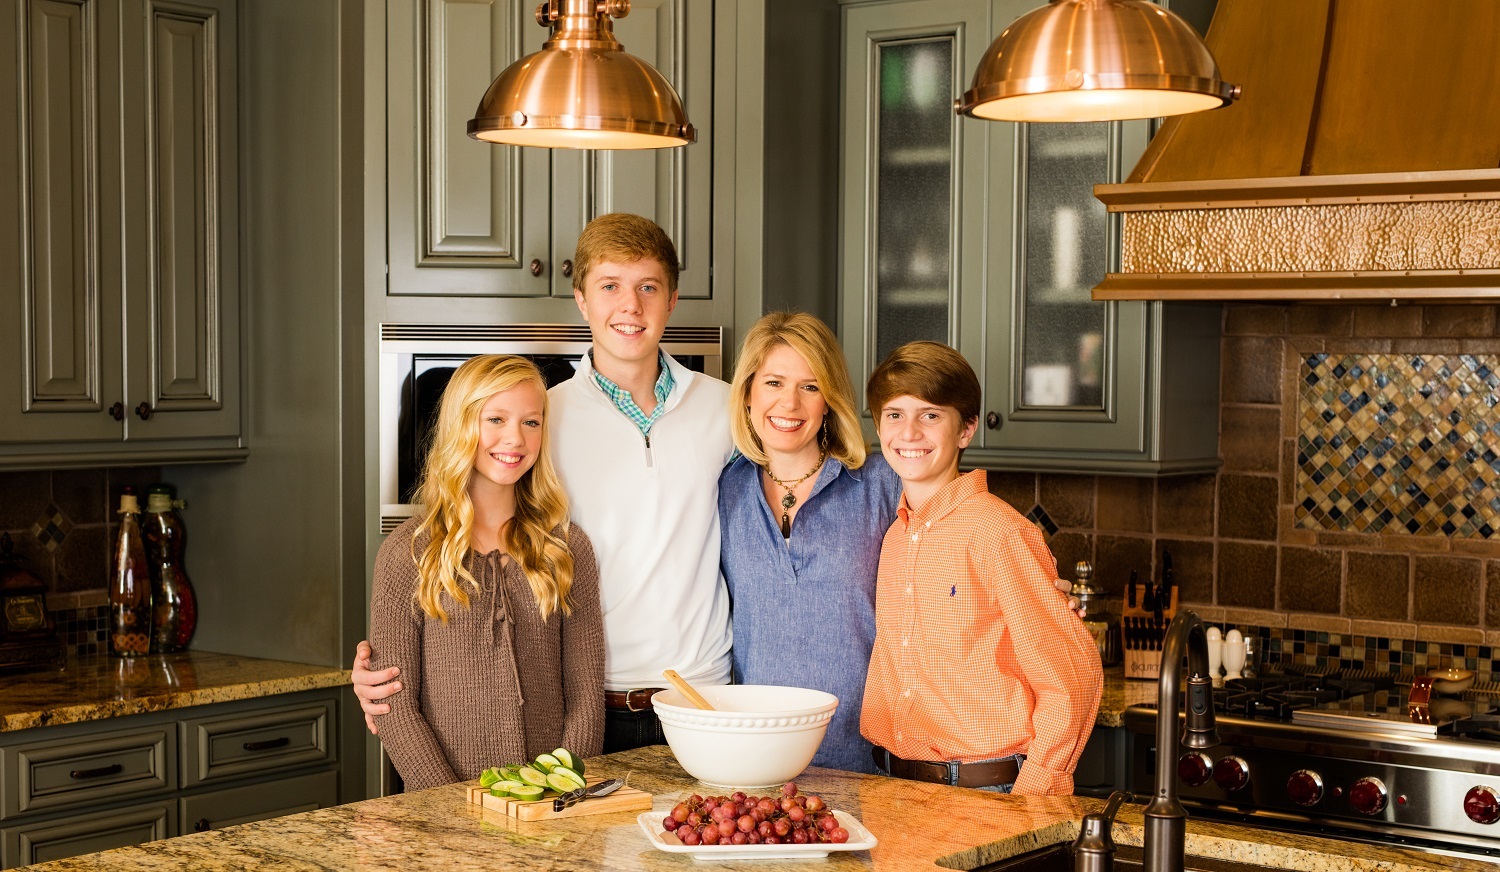 Stacy Brown with children smiling in kitchen